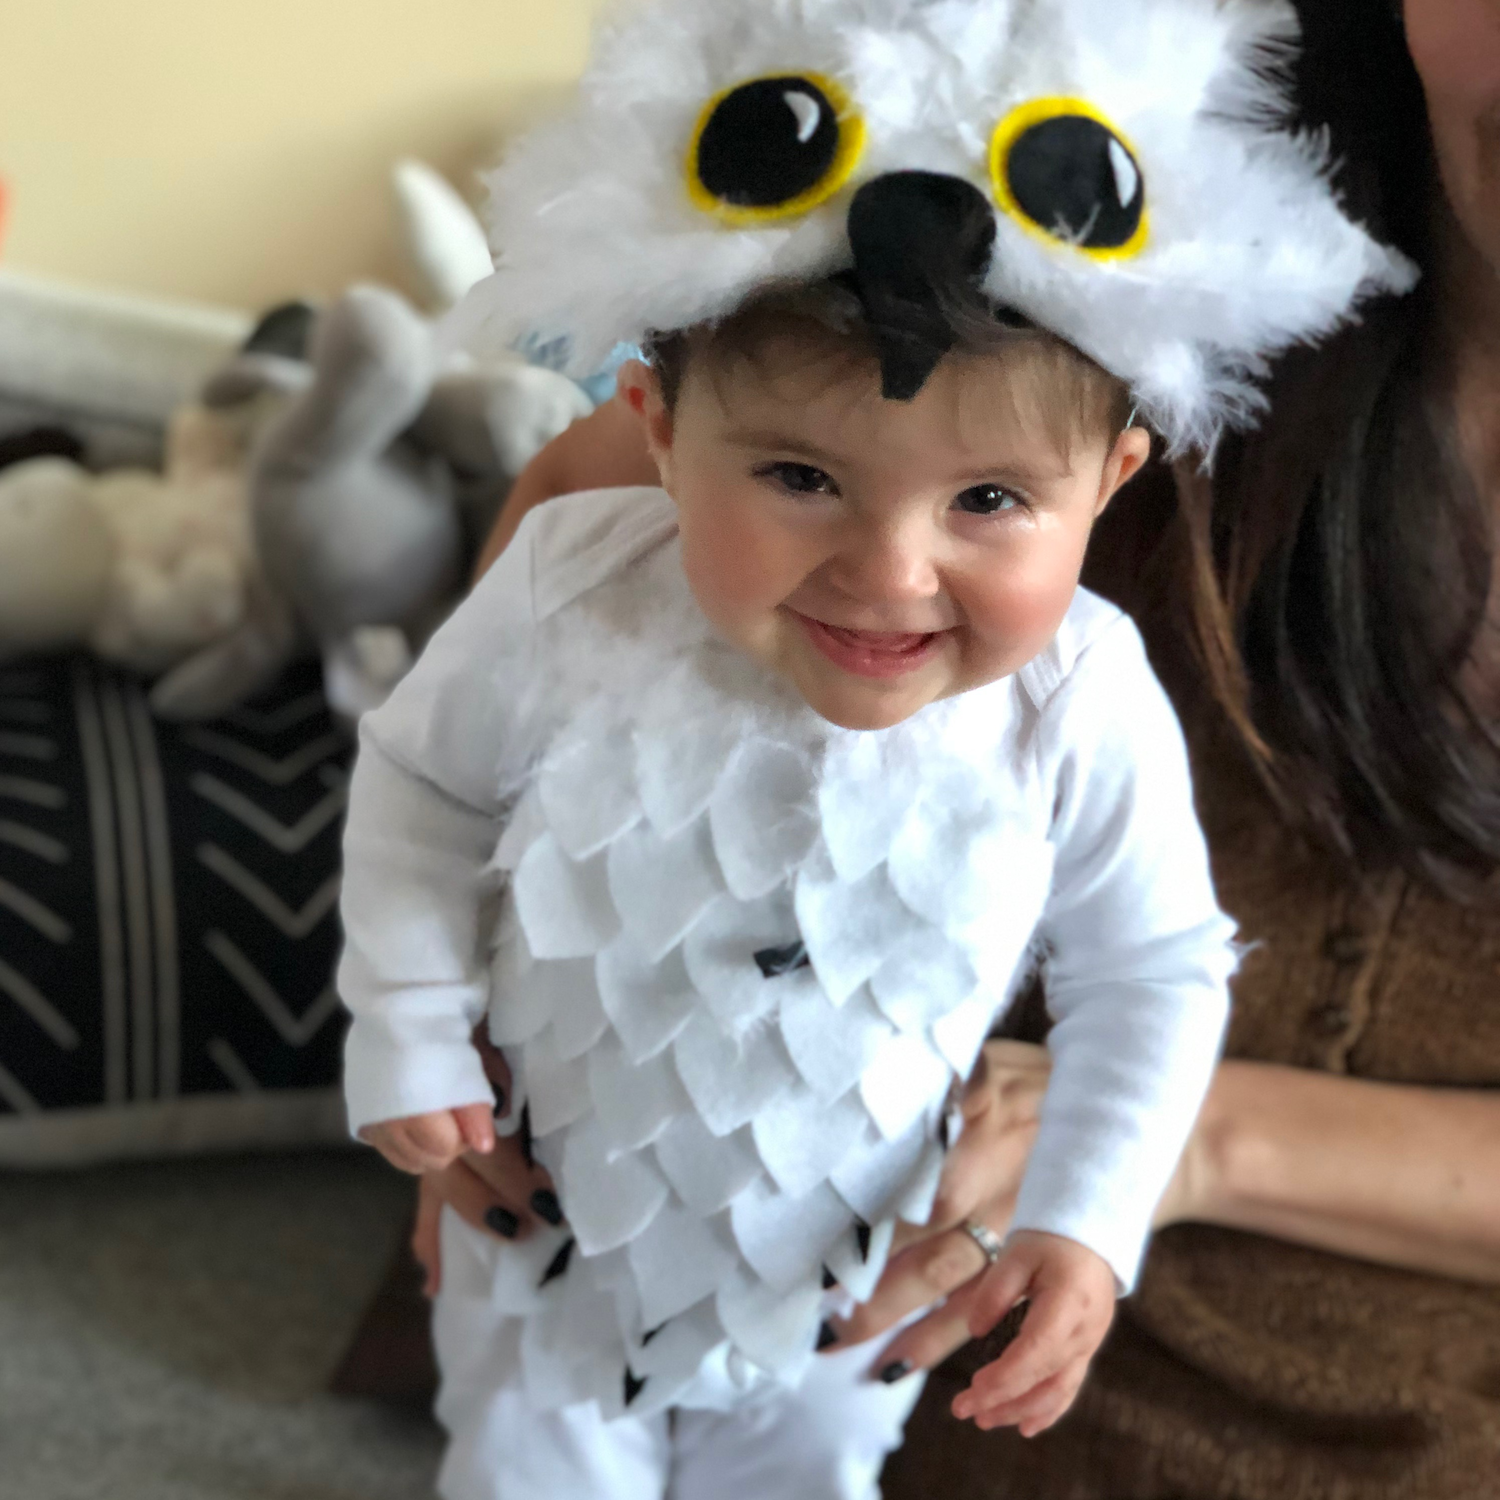 DIY Hedwig the Snowy Owl (from Harry Potter) Costume